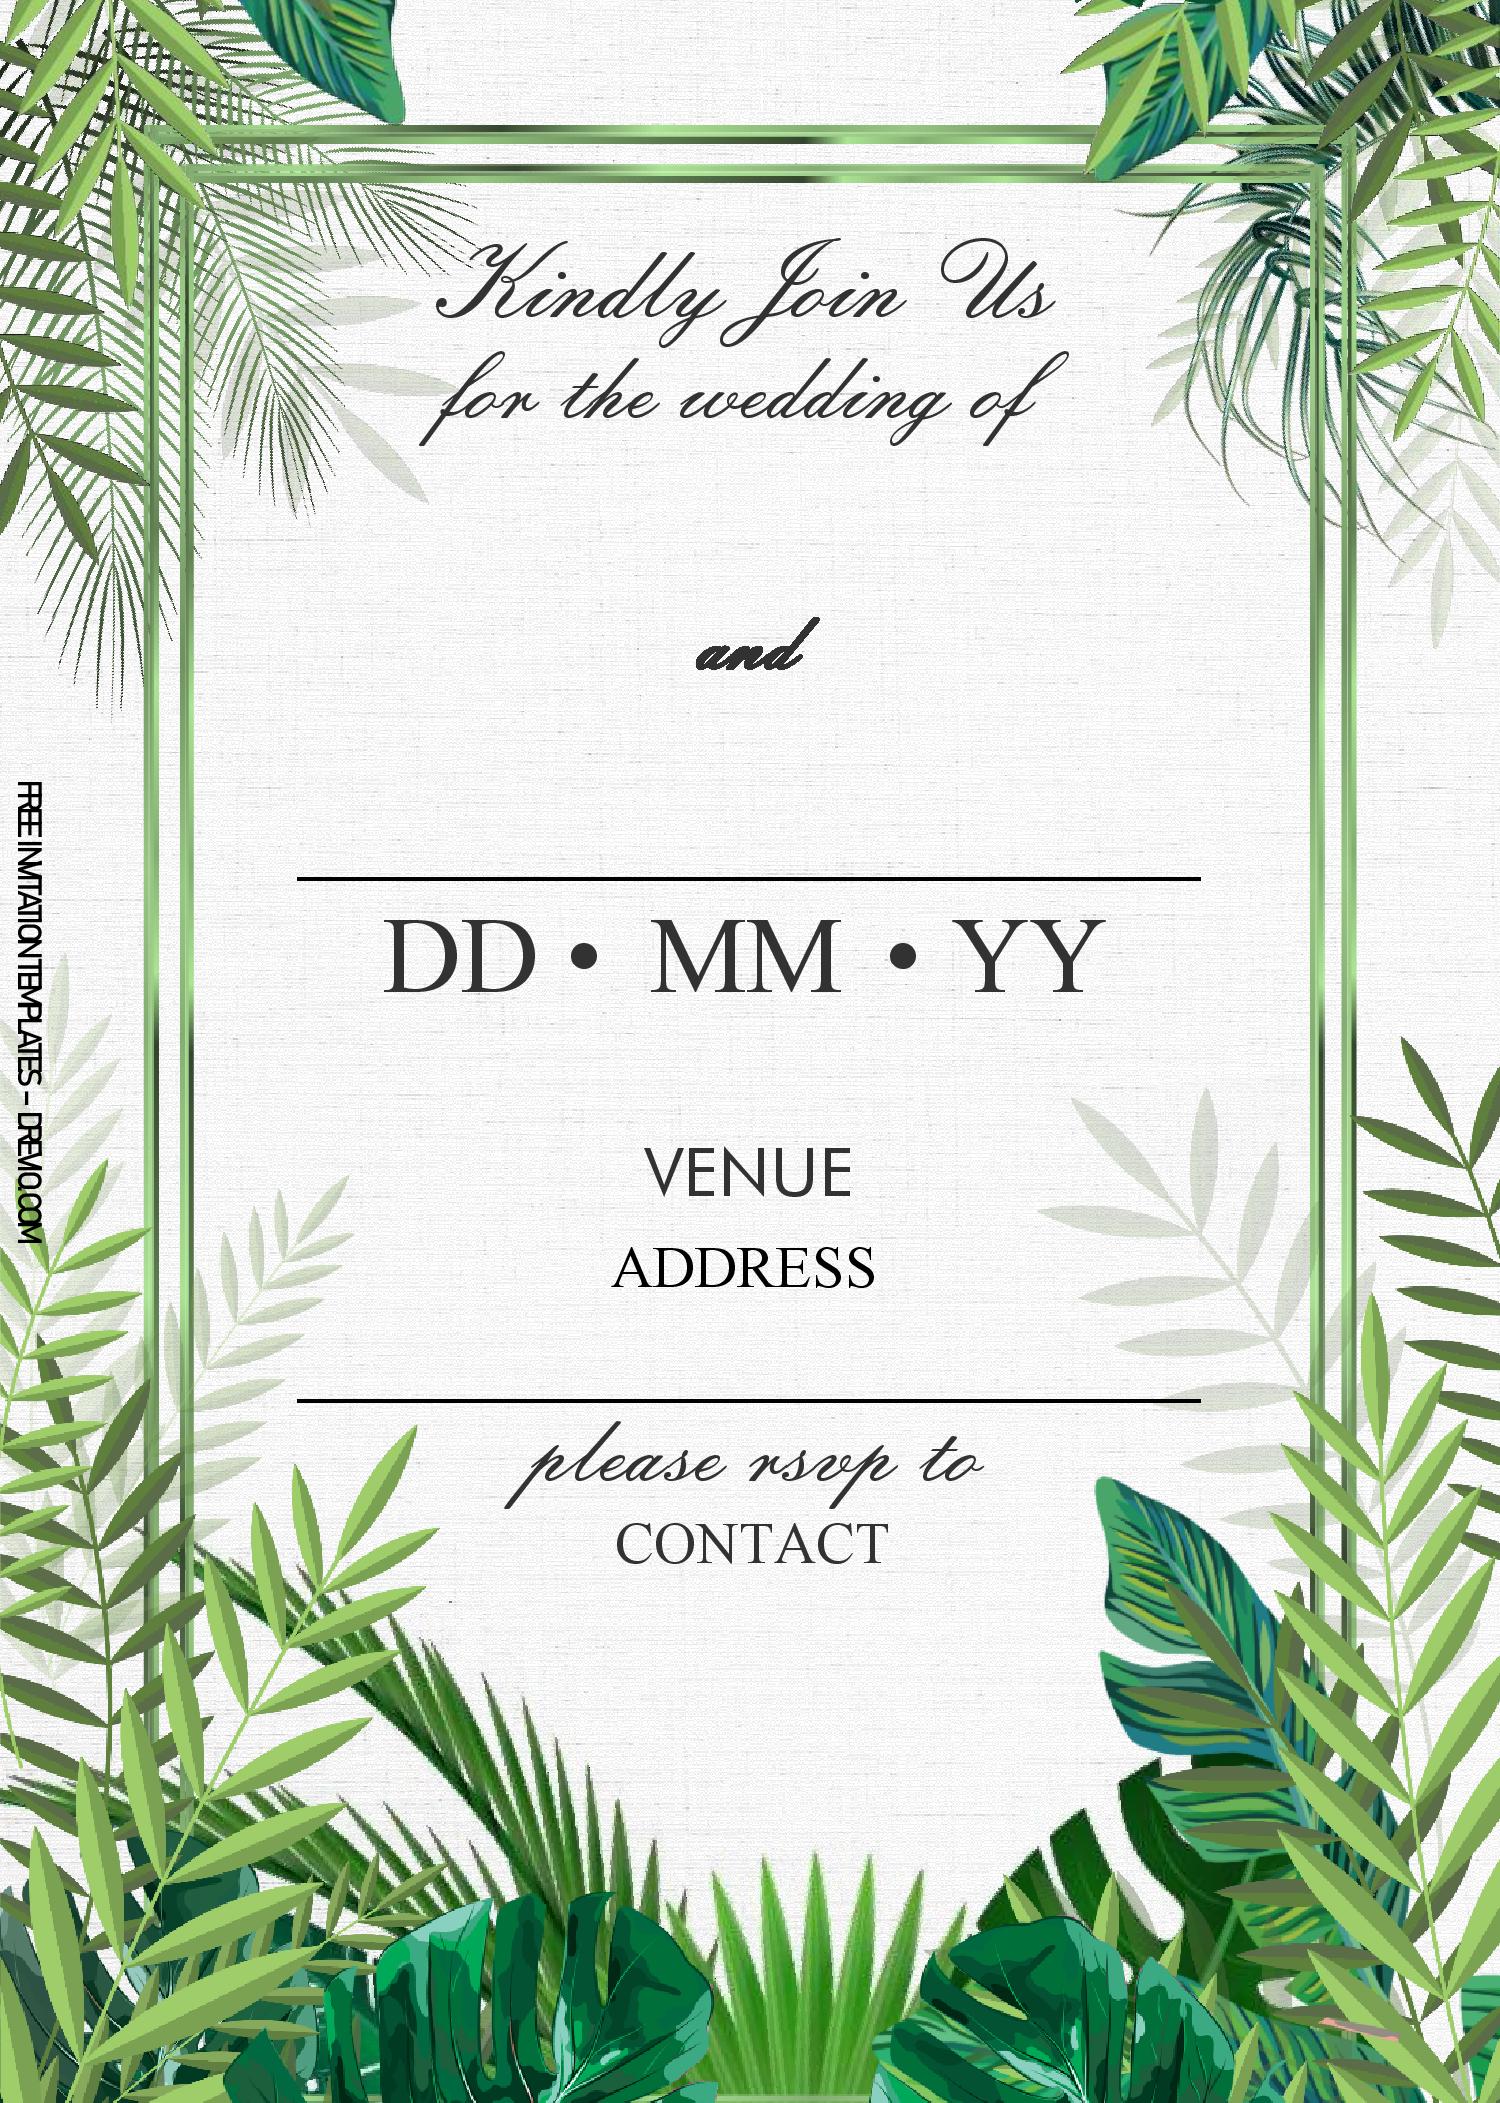 Tropical Leaves Invitation Templates – Editable With MS Word | Download  Hundreds FREE PRINTABLE Birthday Invitation Templates